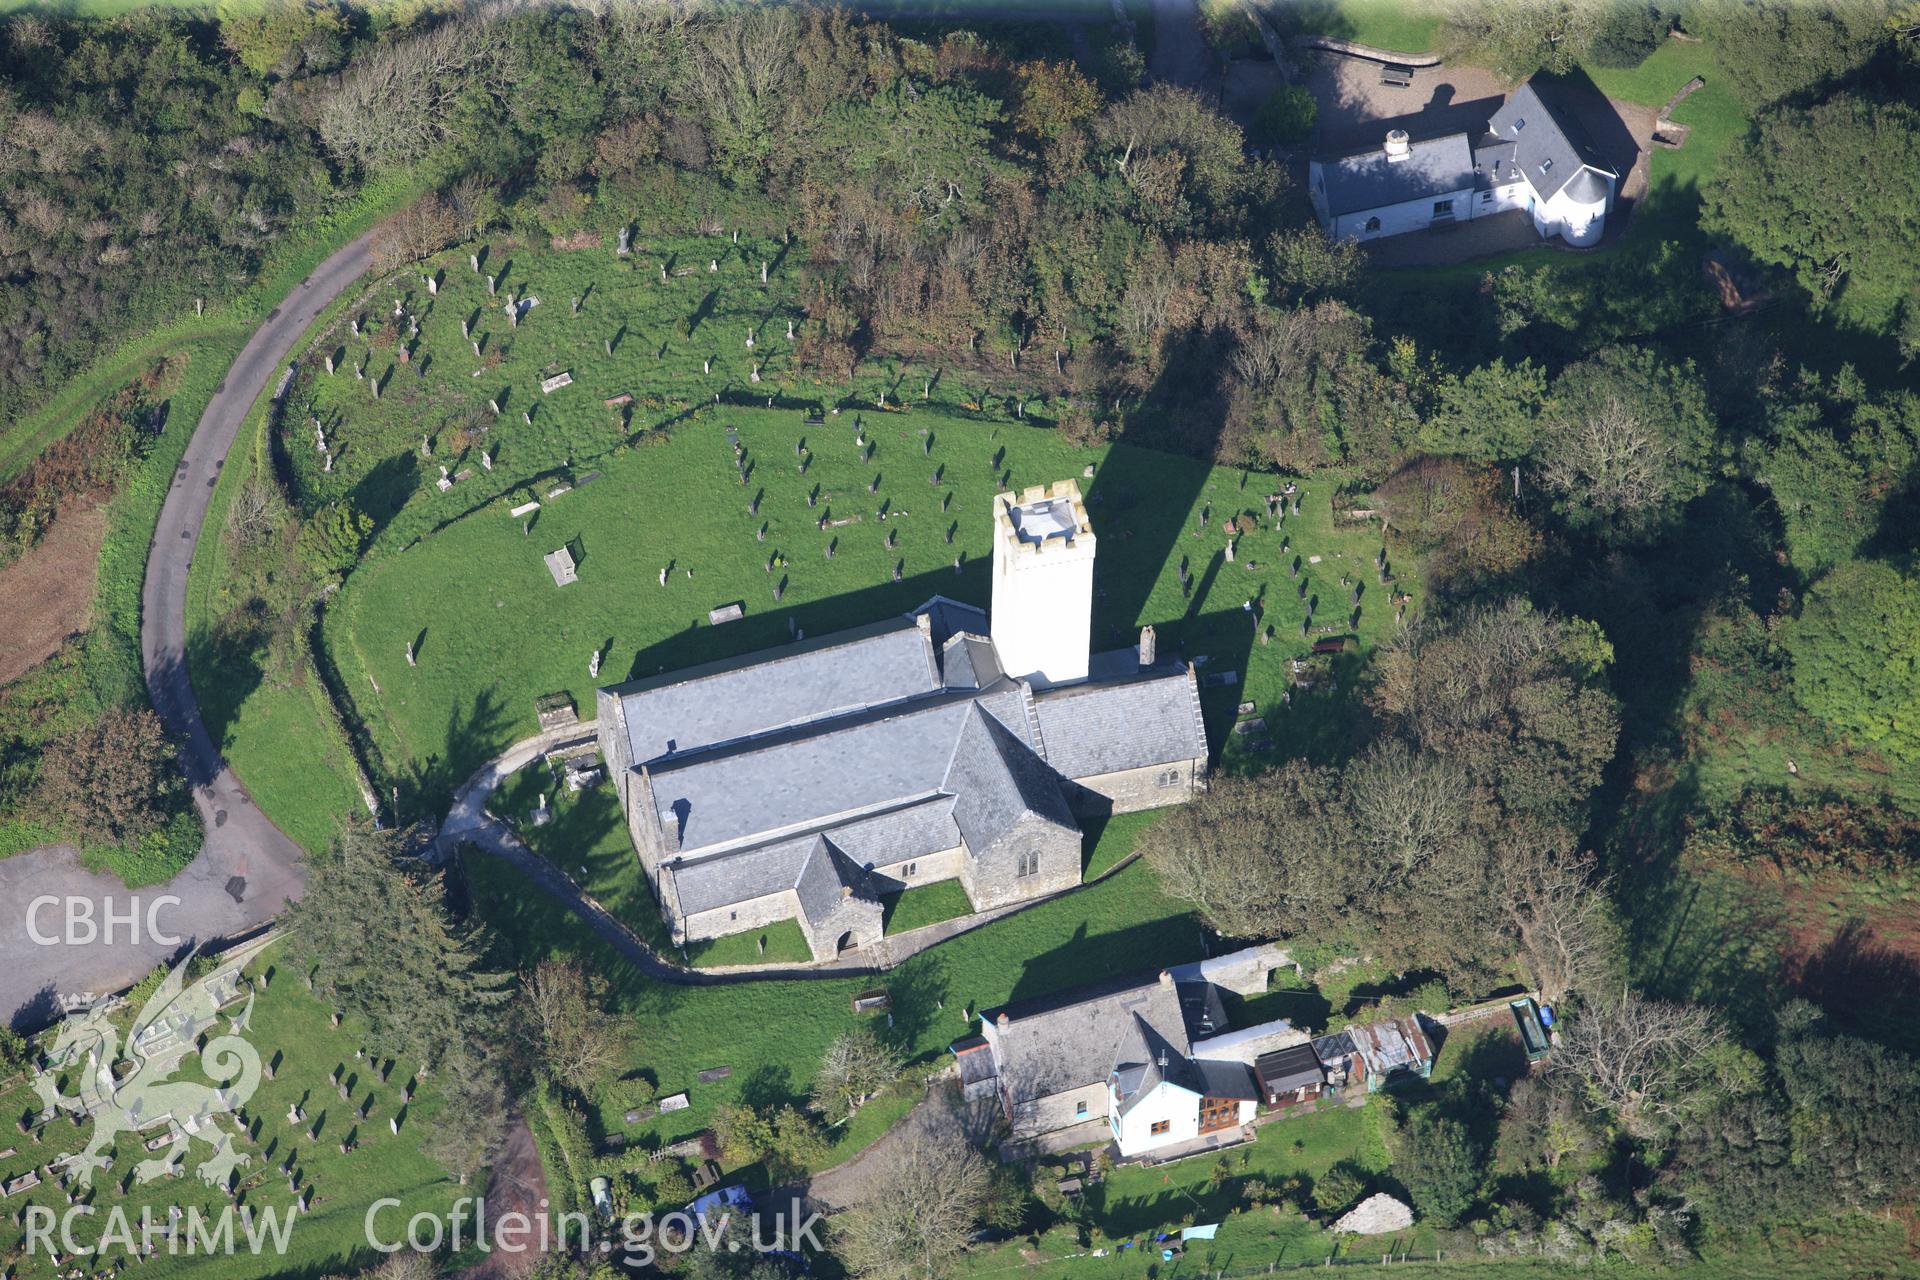 RCAHMW colour oblique photograph of St James's Church, Manorbier, viewed from the south. Taken by Toby Driver and Oliver Davies on 28/09/2011.